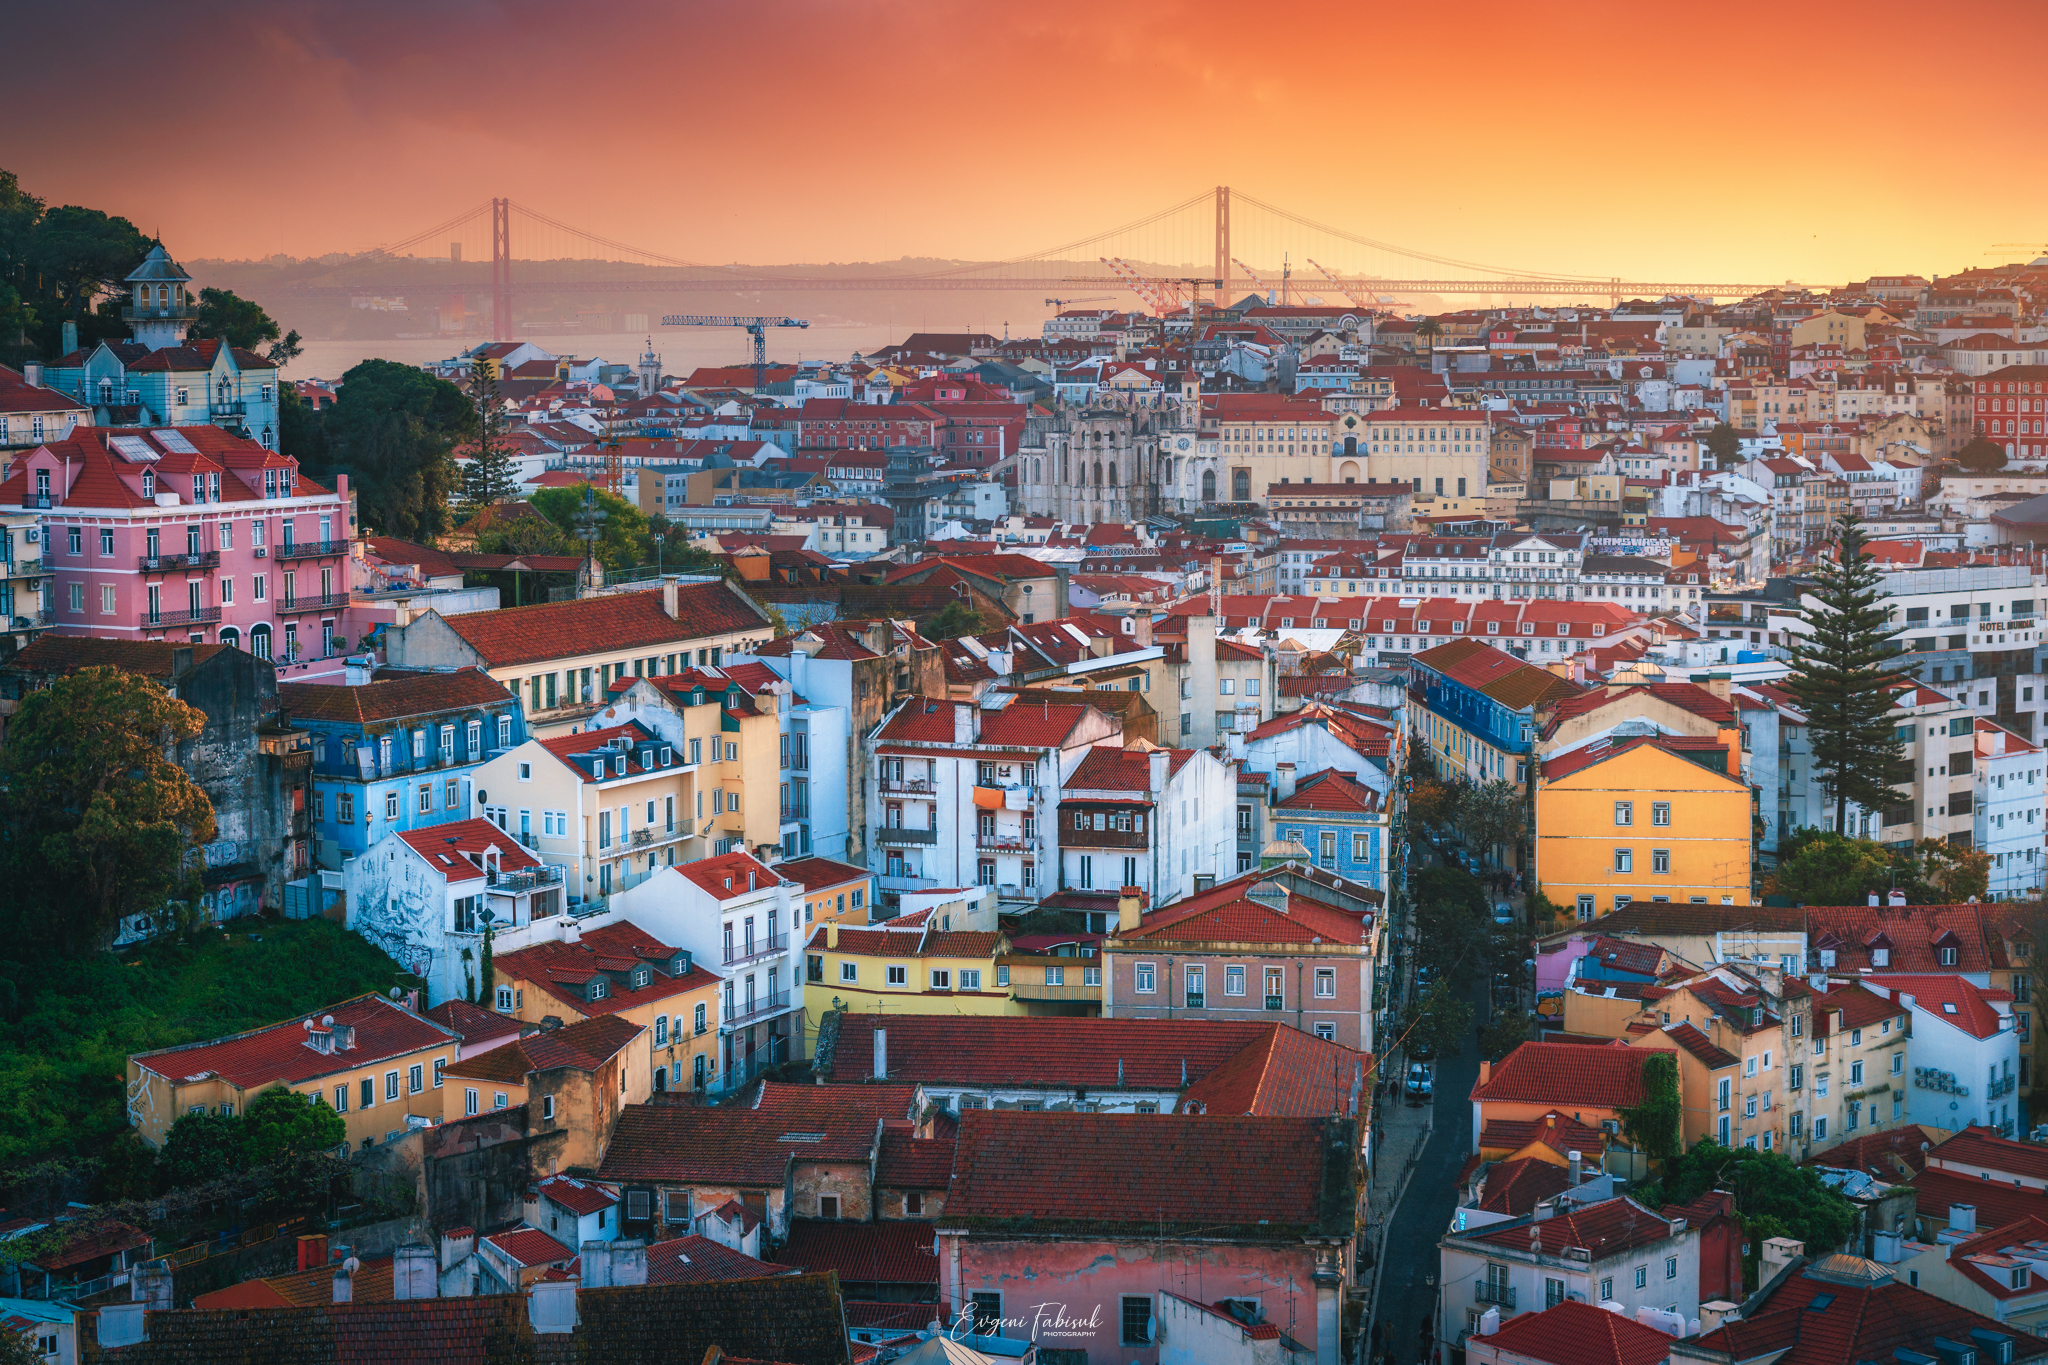 General 2048x1365 Evgeni Fabisuk cityscape building sunset photography trees plants rooftops bridge watermarked Portugal Lisbon